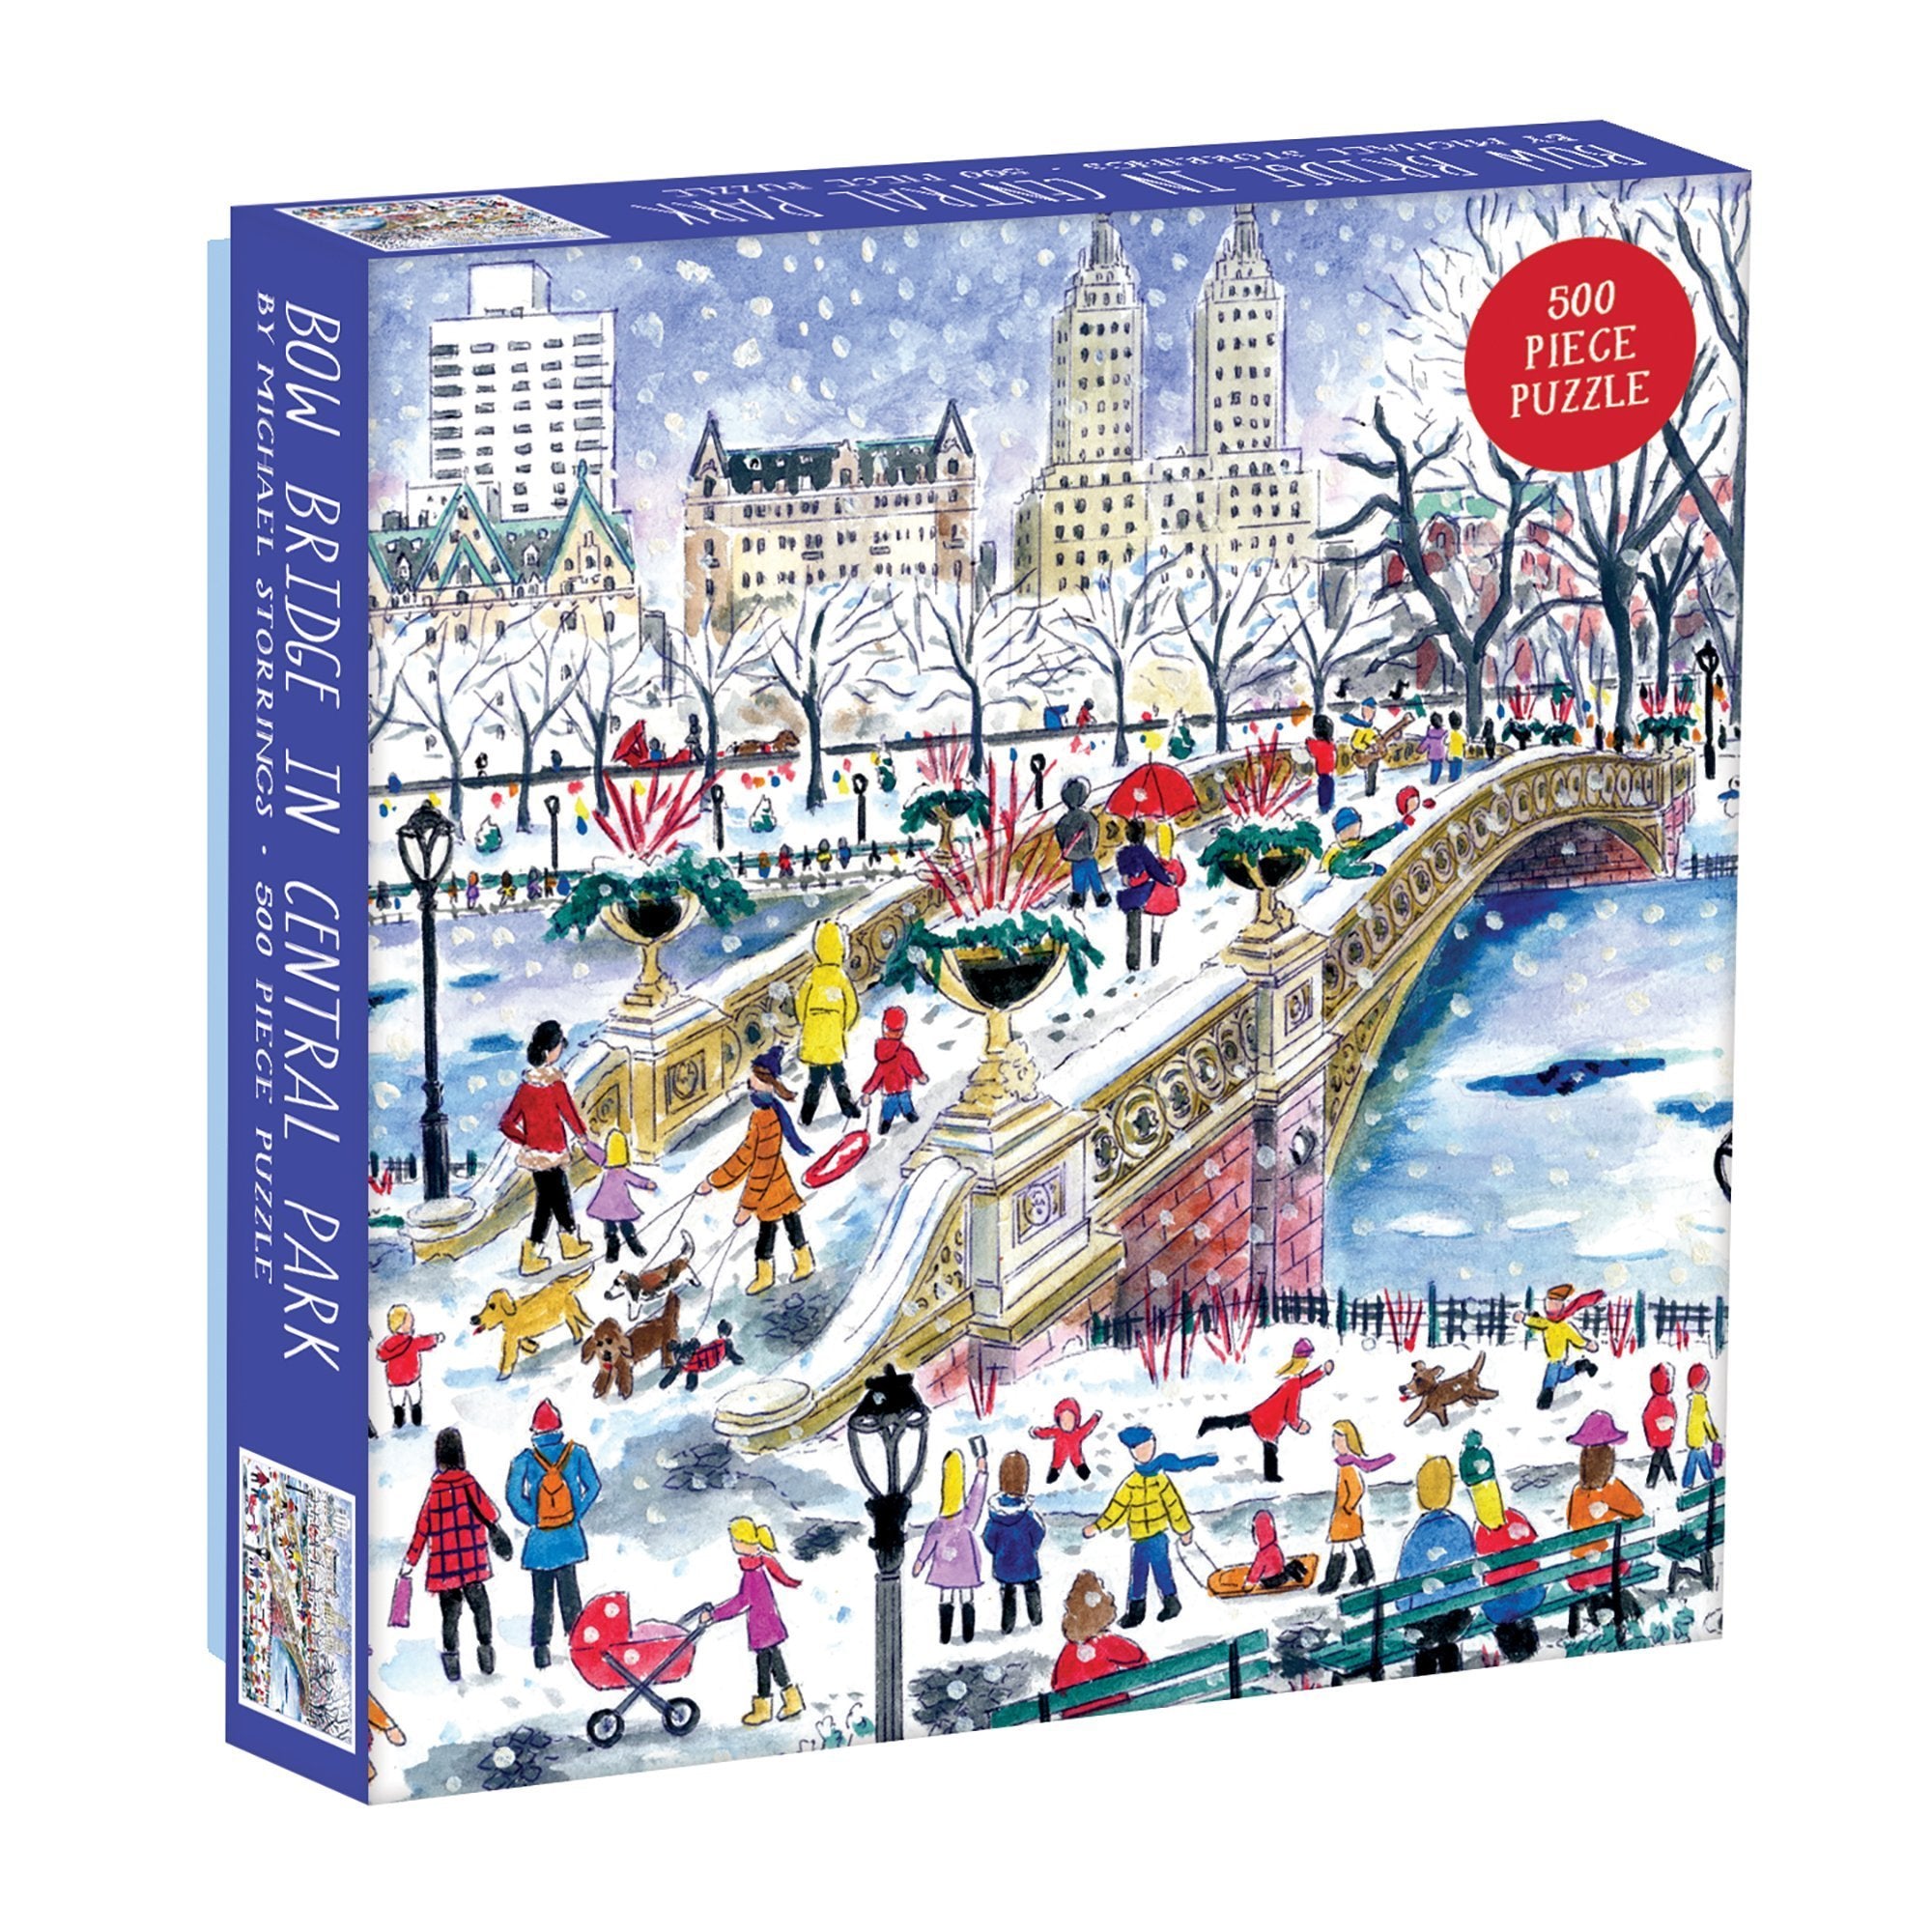 Bow Bridge in Central Park by Michael Storrings (500 pc puzzle)